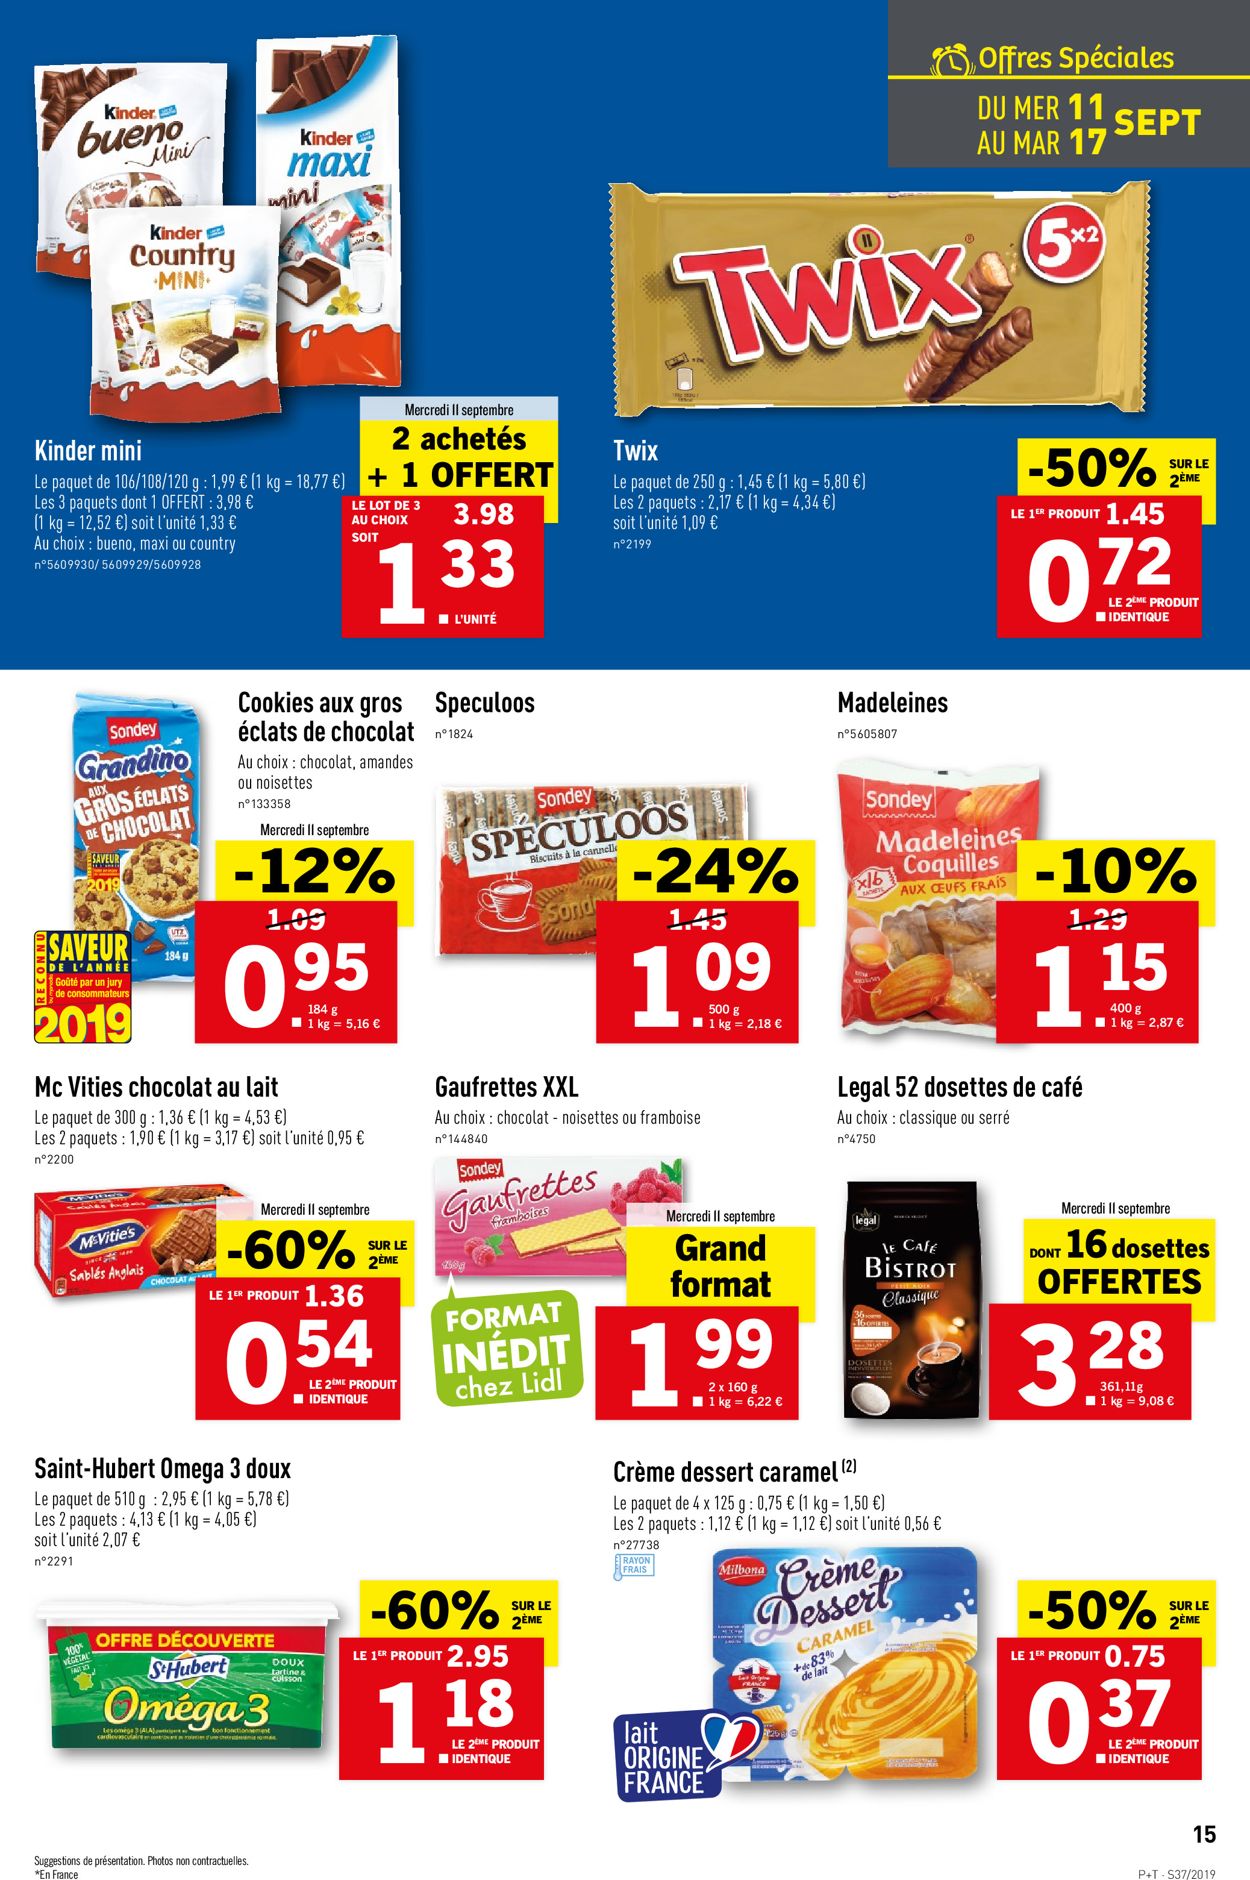 Lidl Catalogue - 11.09-17.09.2019 (Page 15)